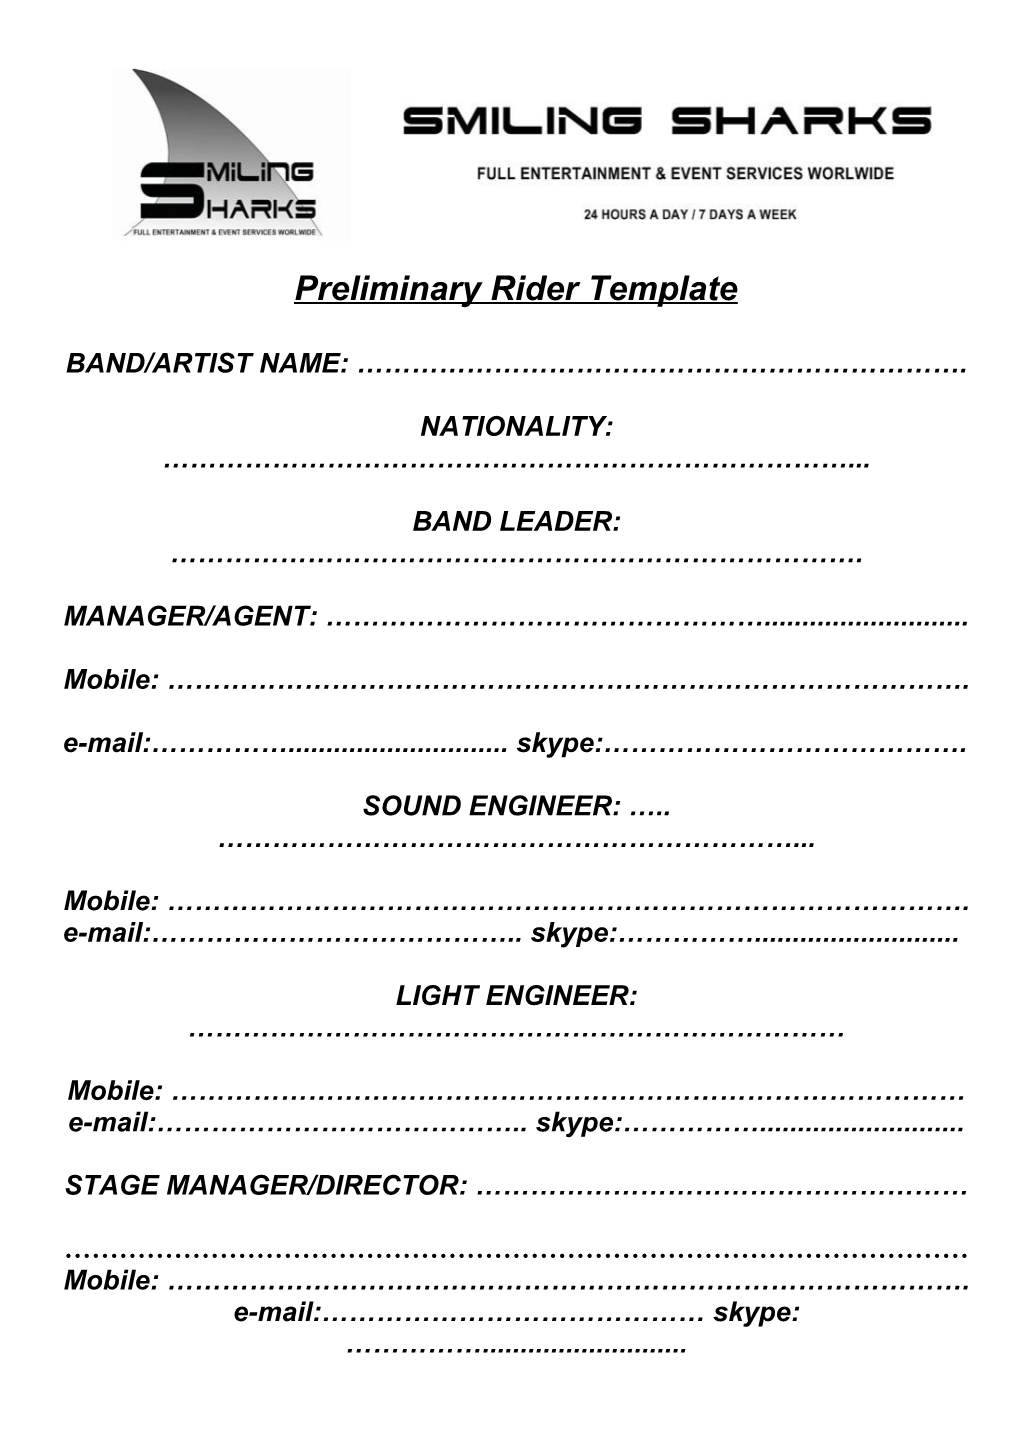 Technical Rider Template Form